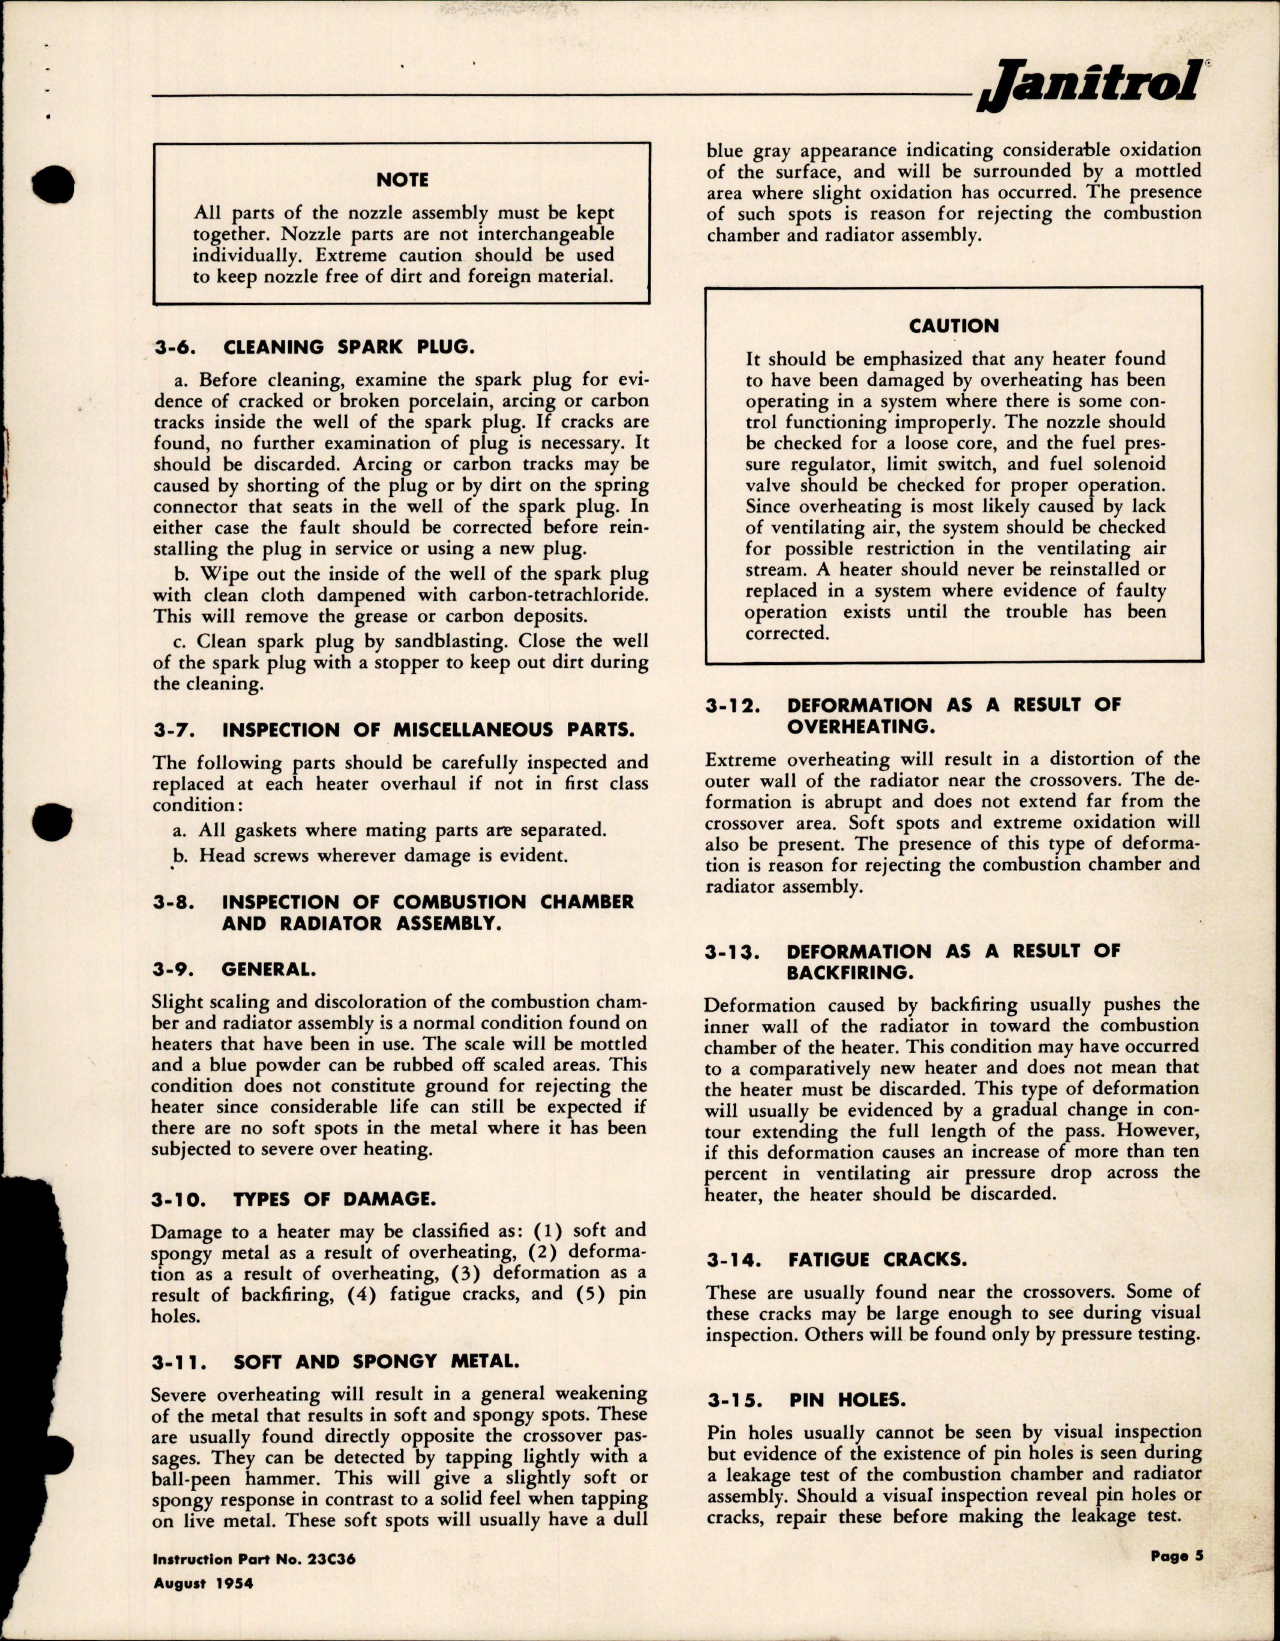 Sample page 5 from AirCorps Library document: Maintenance Instructions for Aircraft Heaters - 20C61 and 20C63, S-50 and S-100 Series 